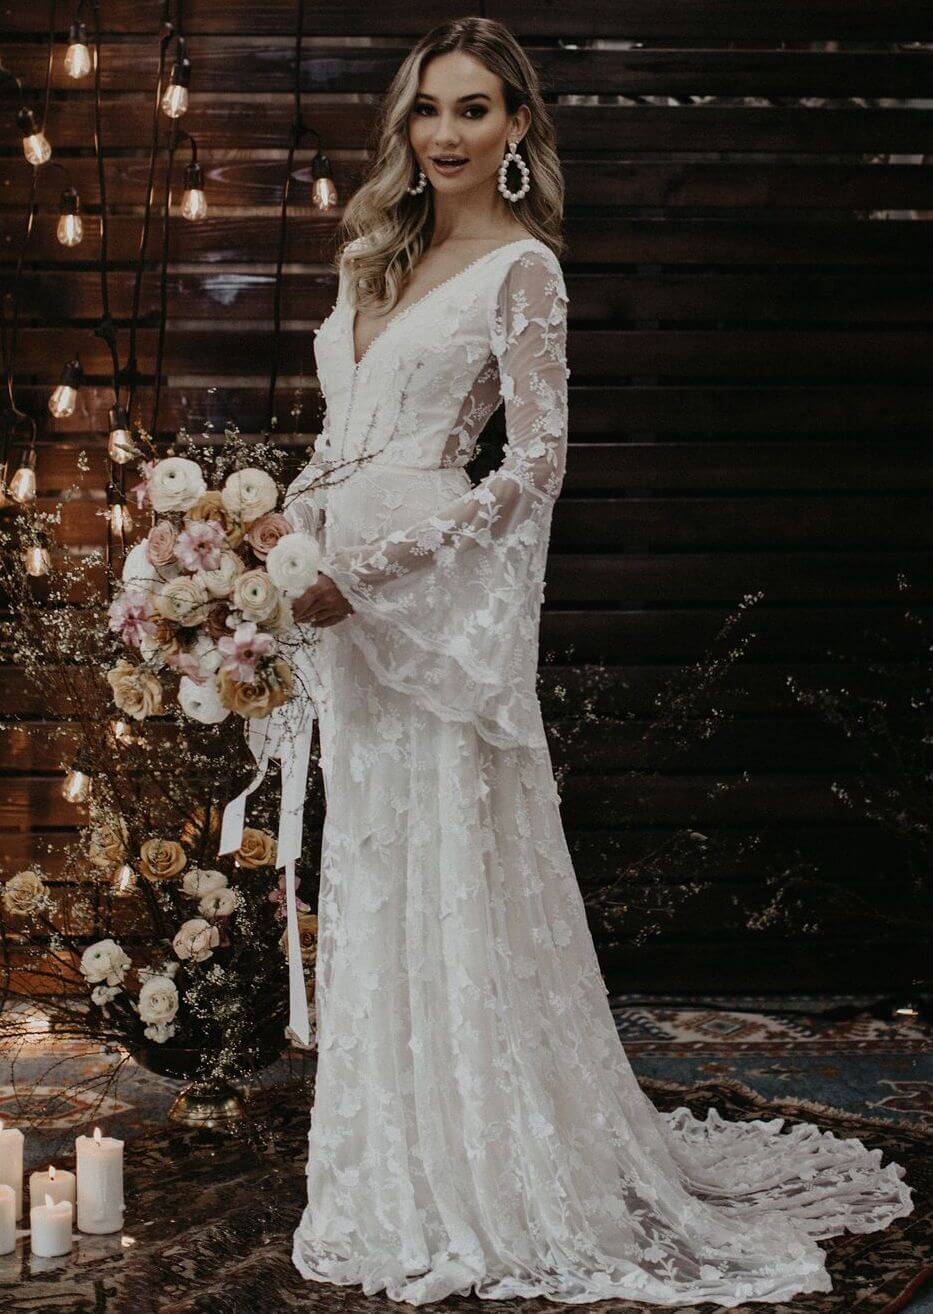 Samantha Bell Sleeve Wedding Dress Dreamers and Lovers